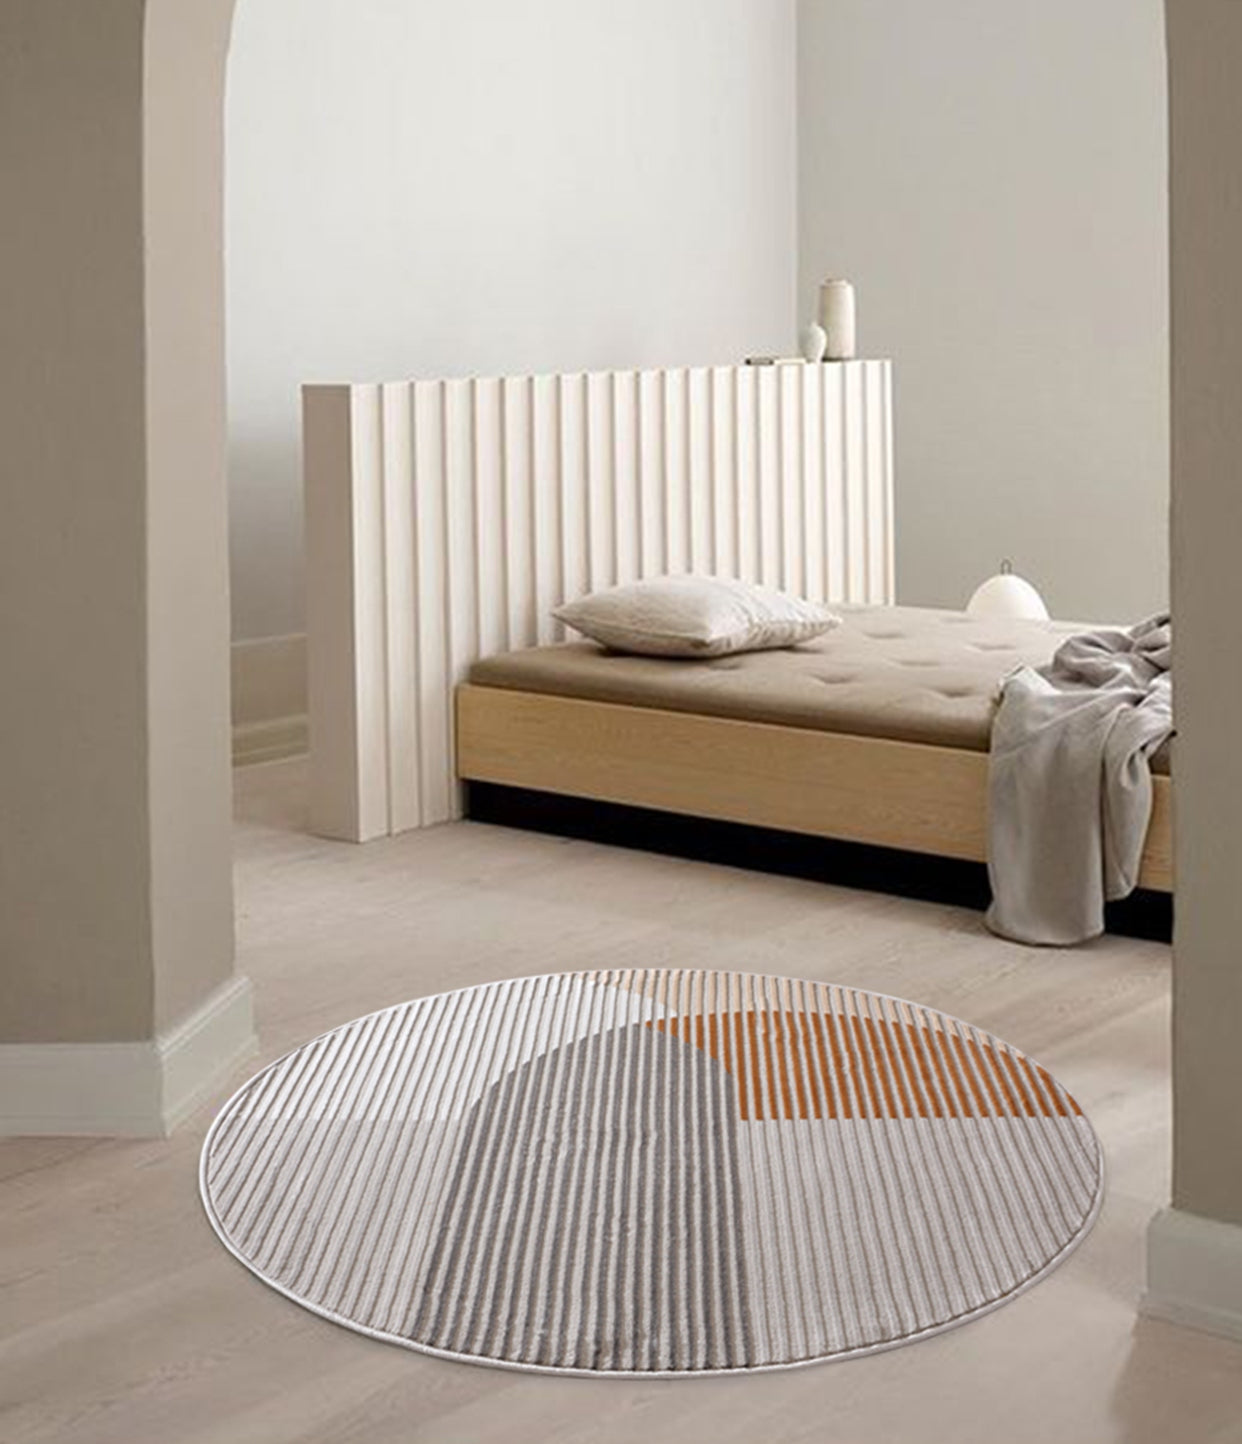 Modern Area Rugs under Coffee Table, Modern Rugs in Bedroom, Dining Room Area Rug,Contemporary Area Rugs, Round Area Rugs